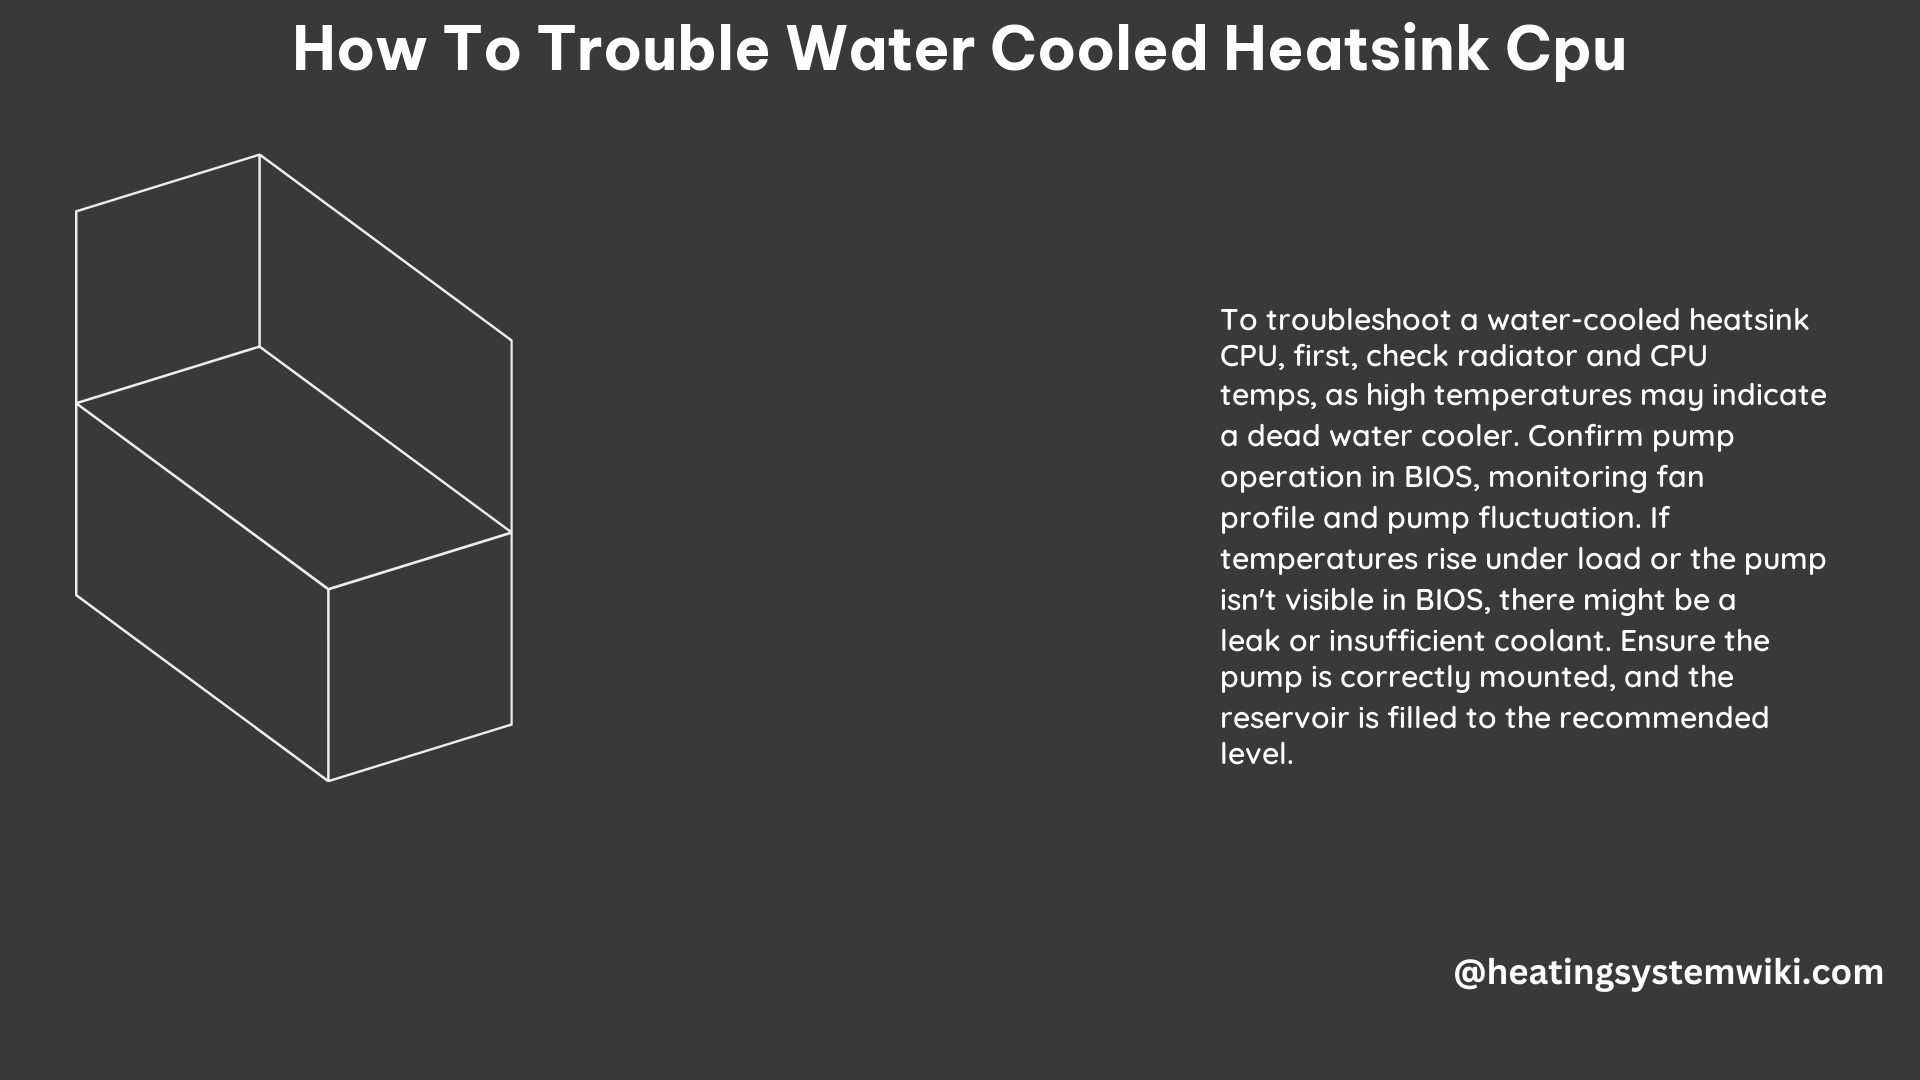 How to Trouble Water Cooled Heatsink CPU